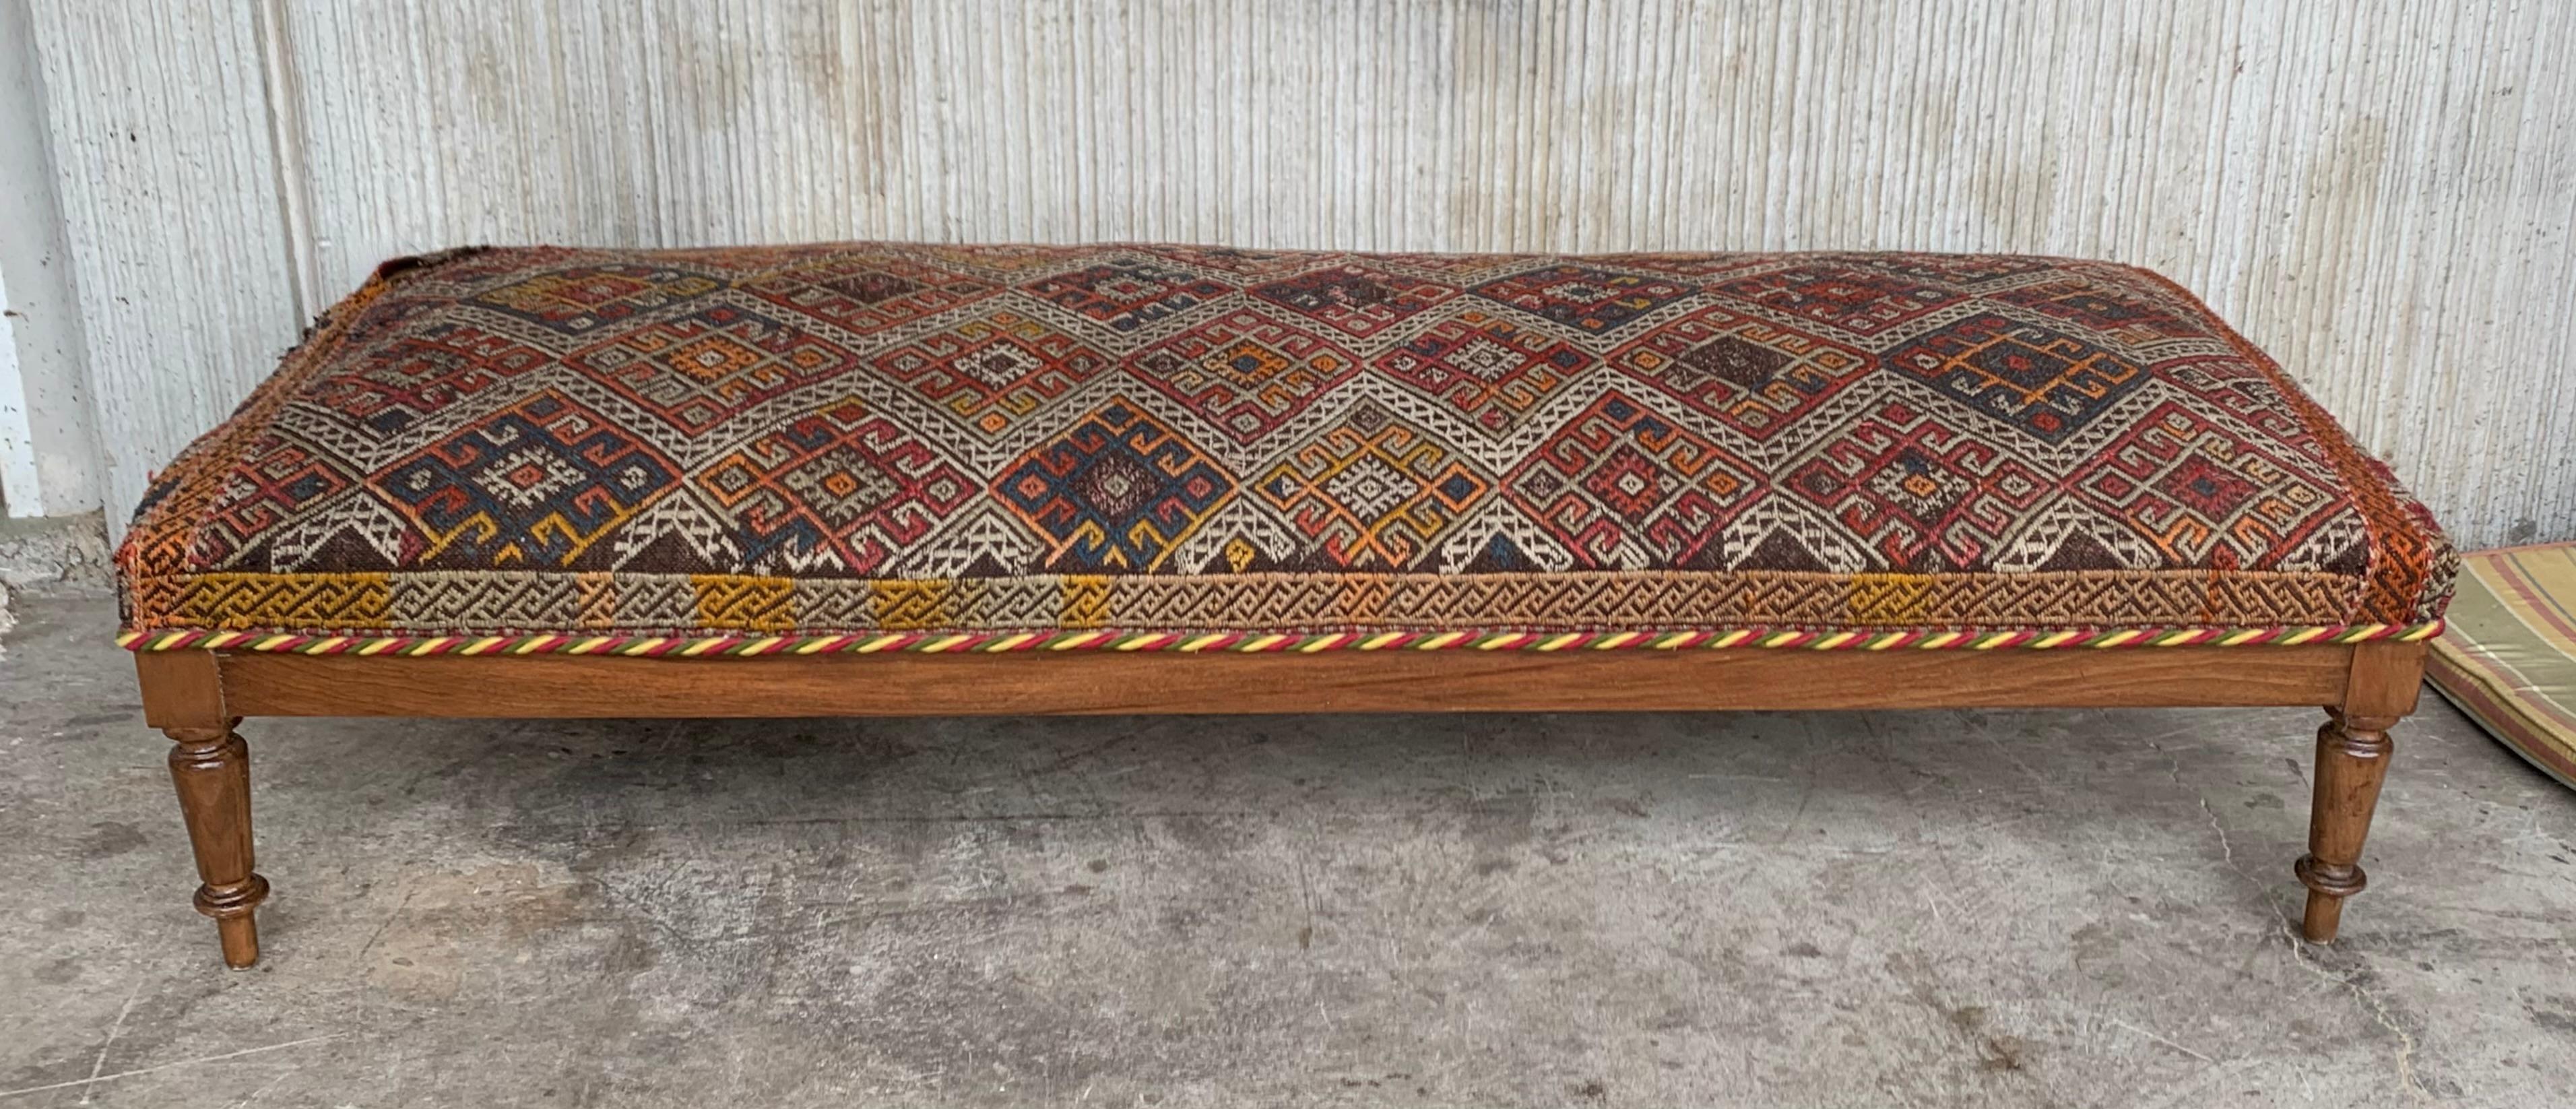 This beautiful Louis XIV style French bench was made in solid patinated oak in the early 1920s. Fully restored and newly upholstered with a large wool colorful geometric, this large bench will be a perfect addition to the foot of your bed, to your